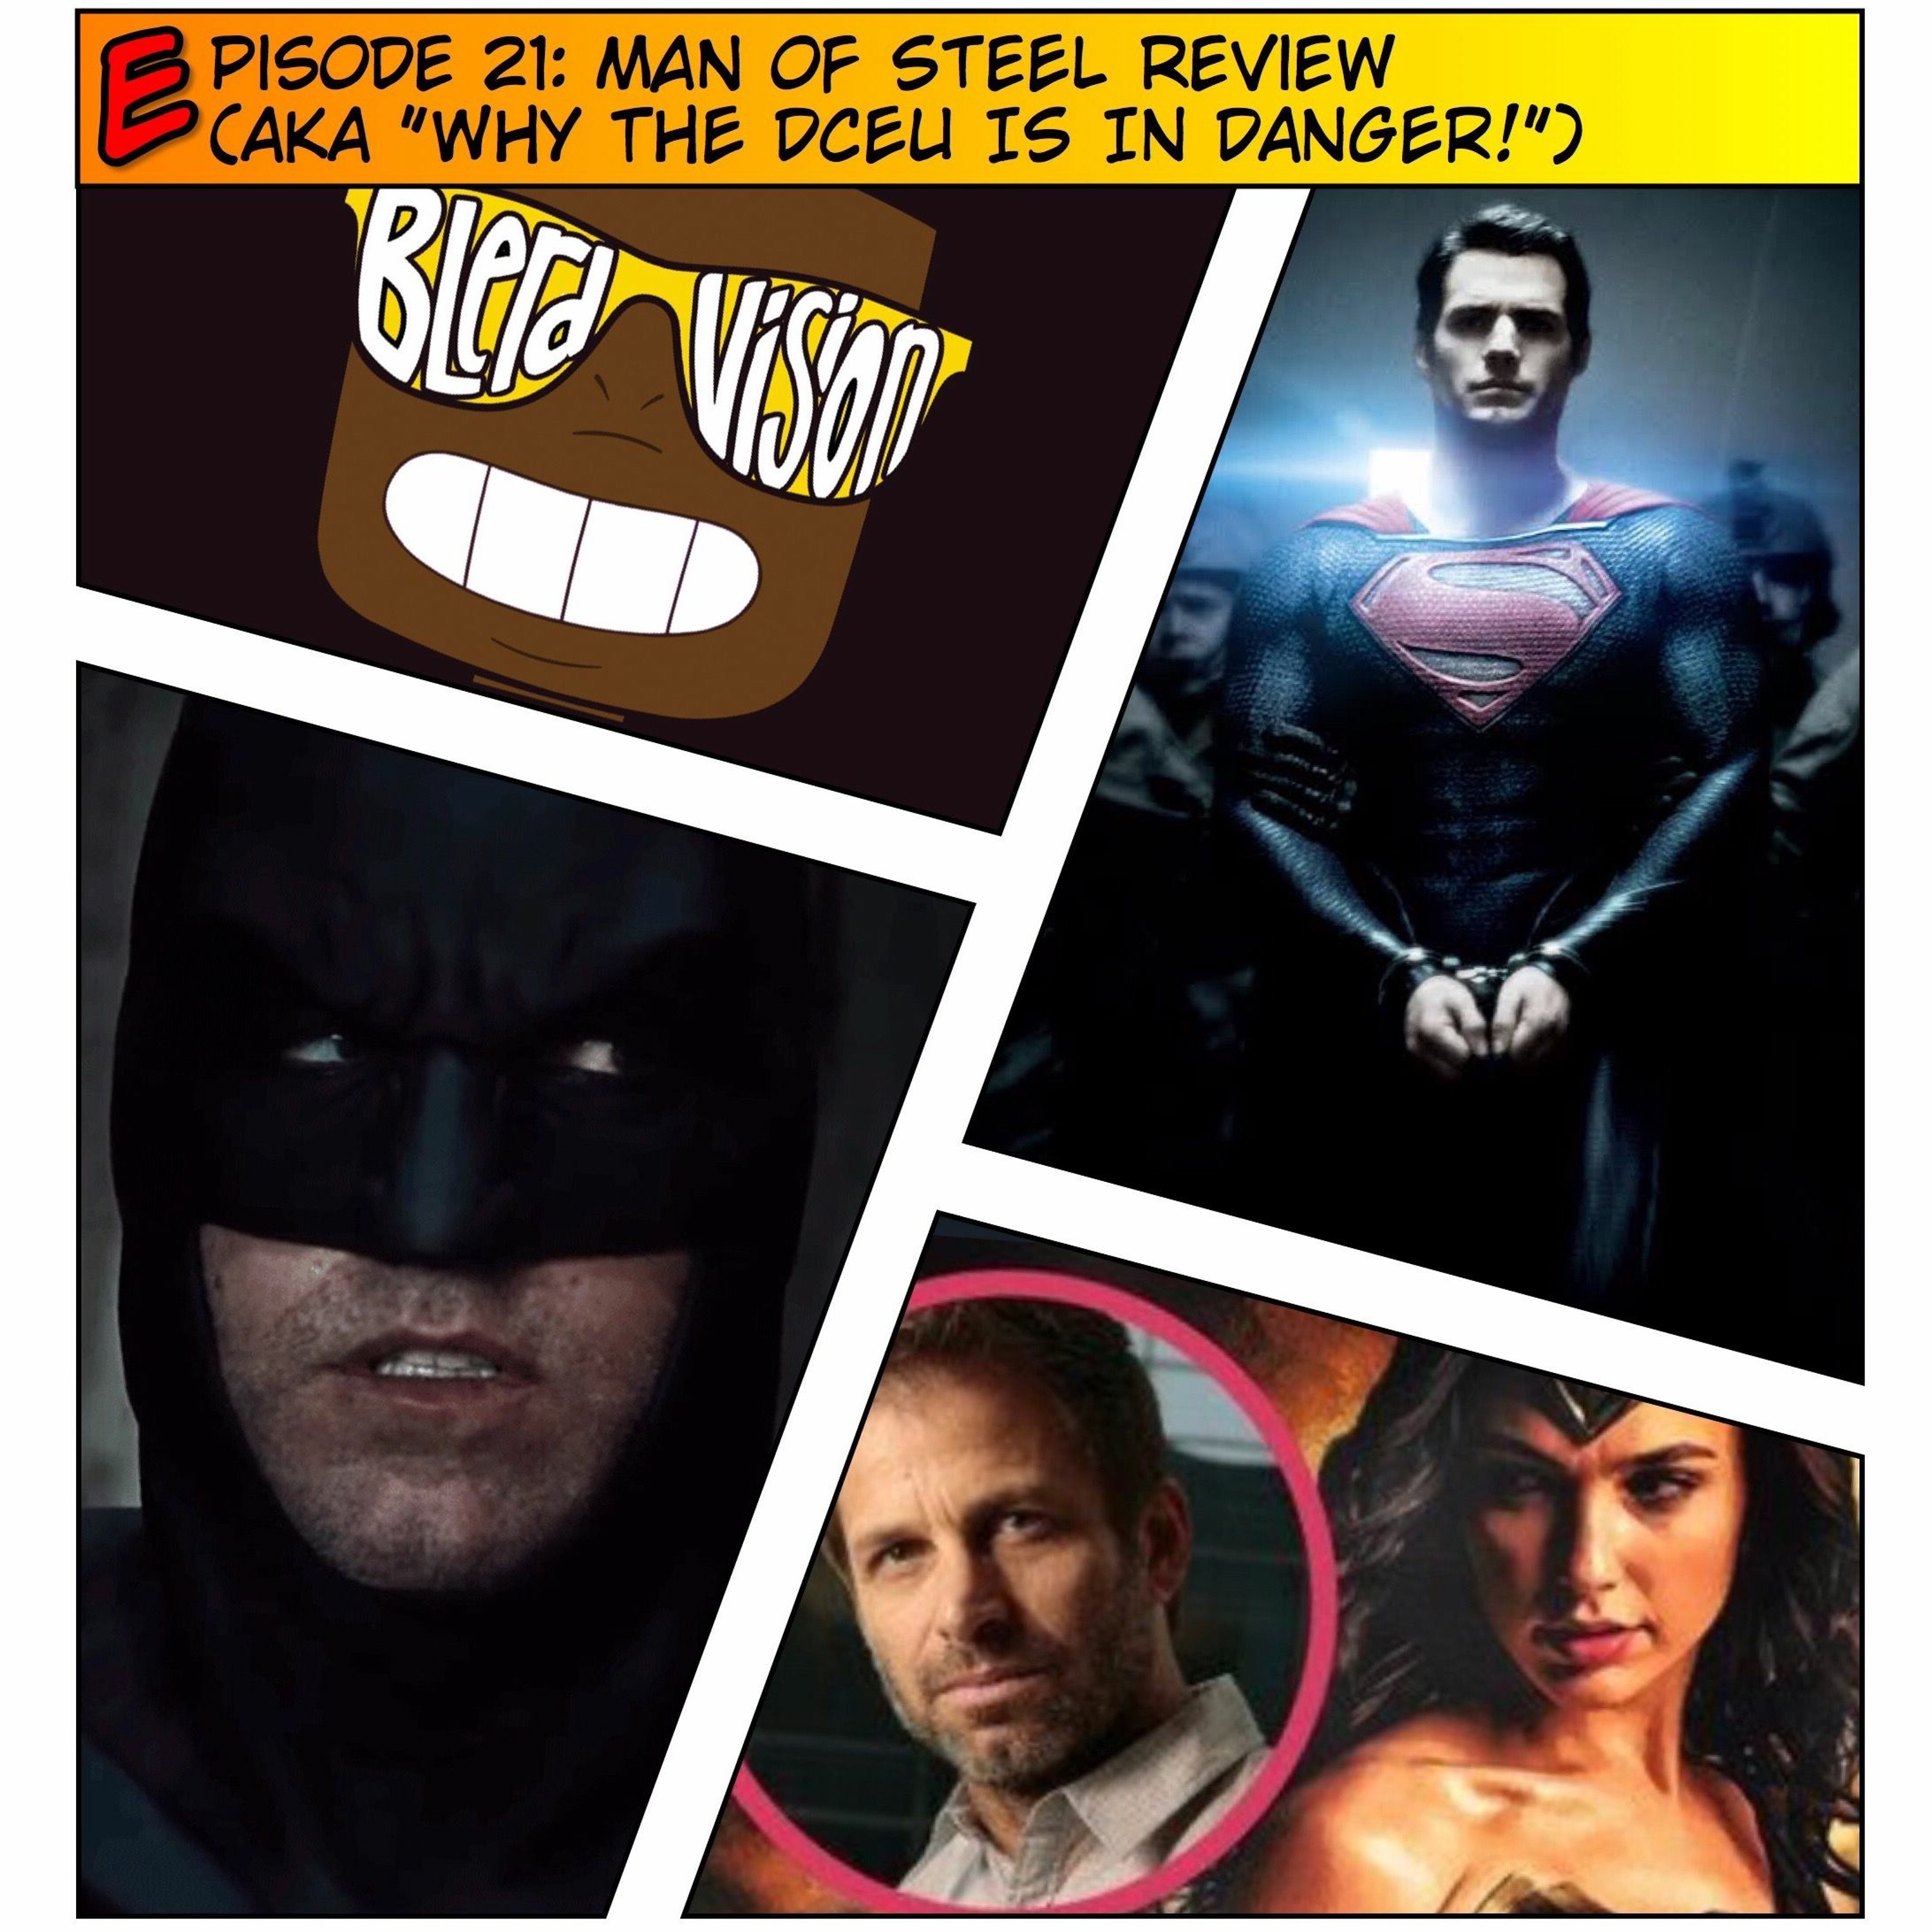 EP21: Man of Steel Review (AKA ”Why the DCEU Is in Danger!”)